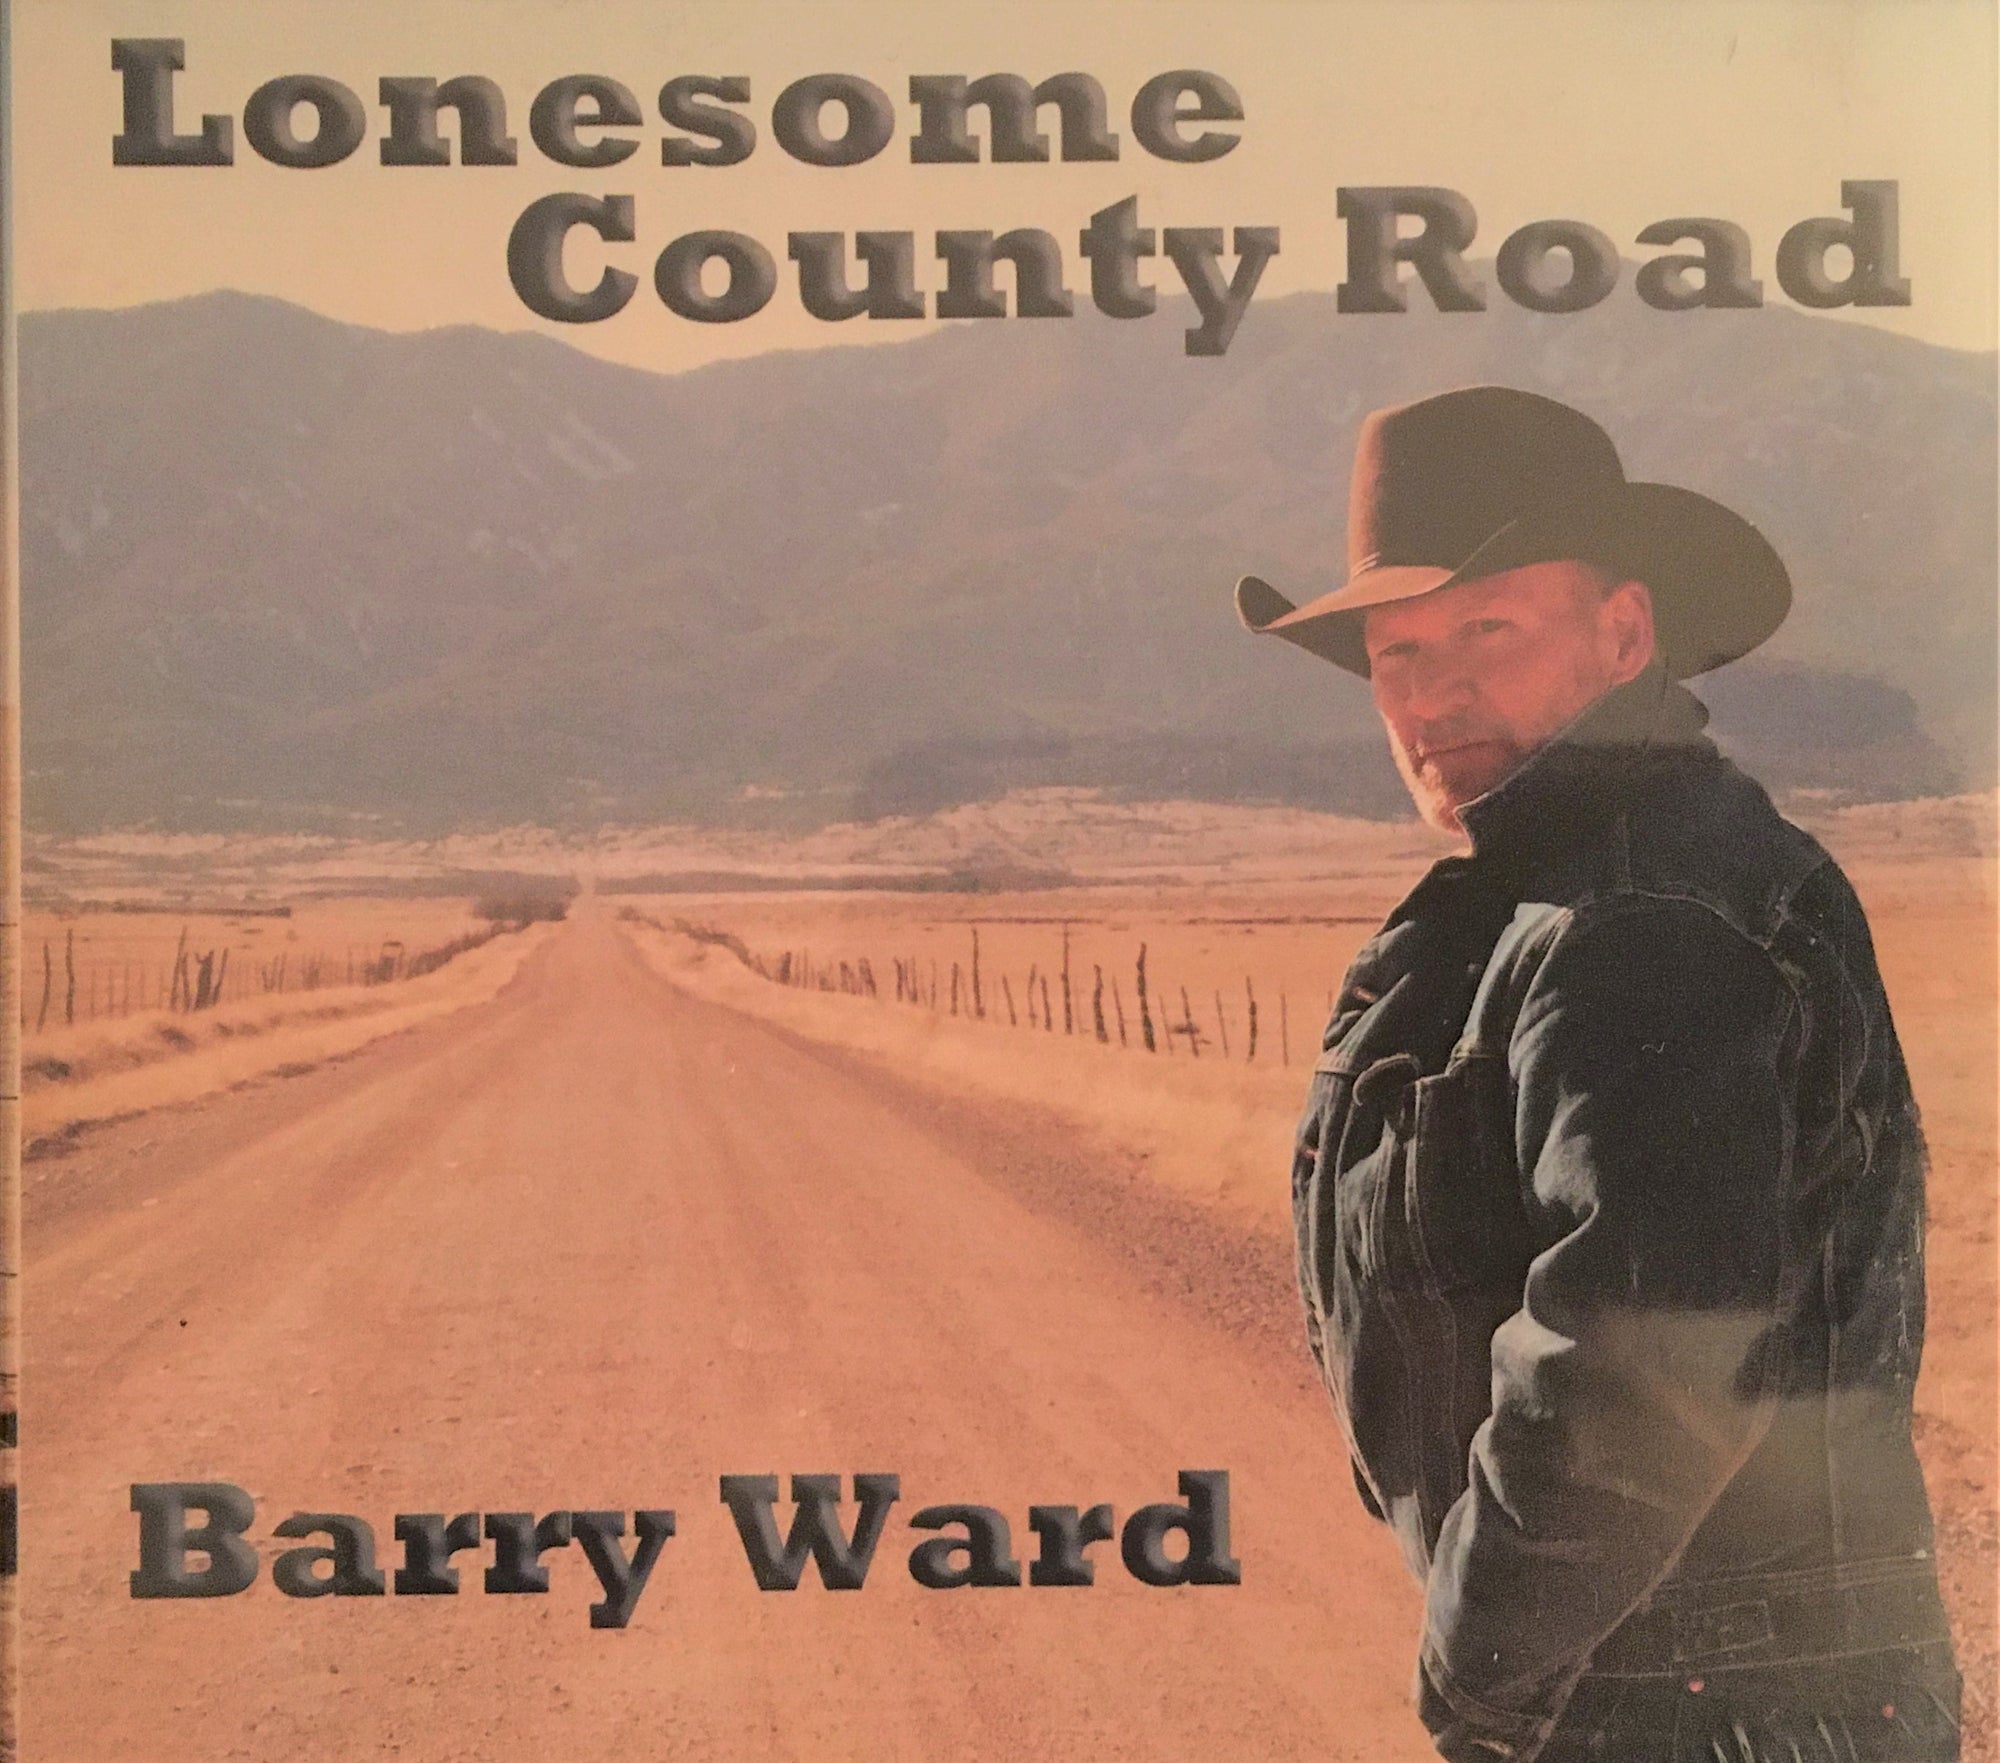 CD Lonesome County Road by Barry Ward